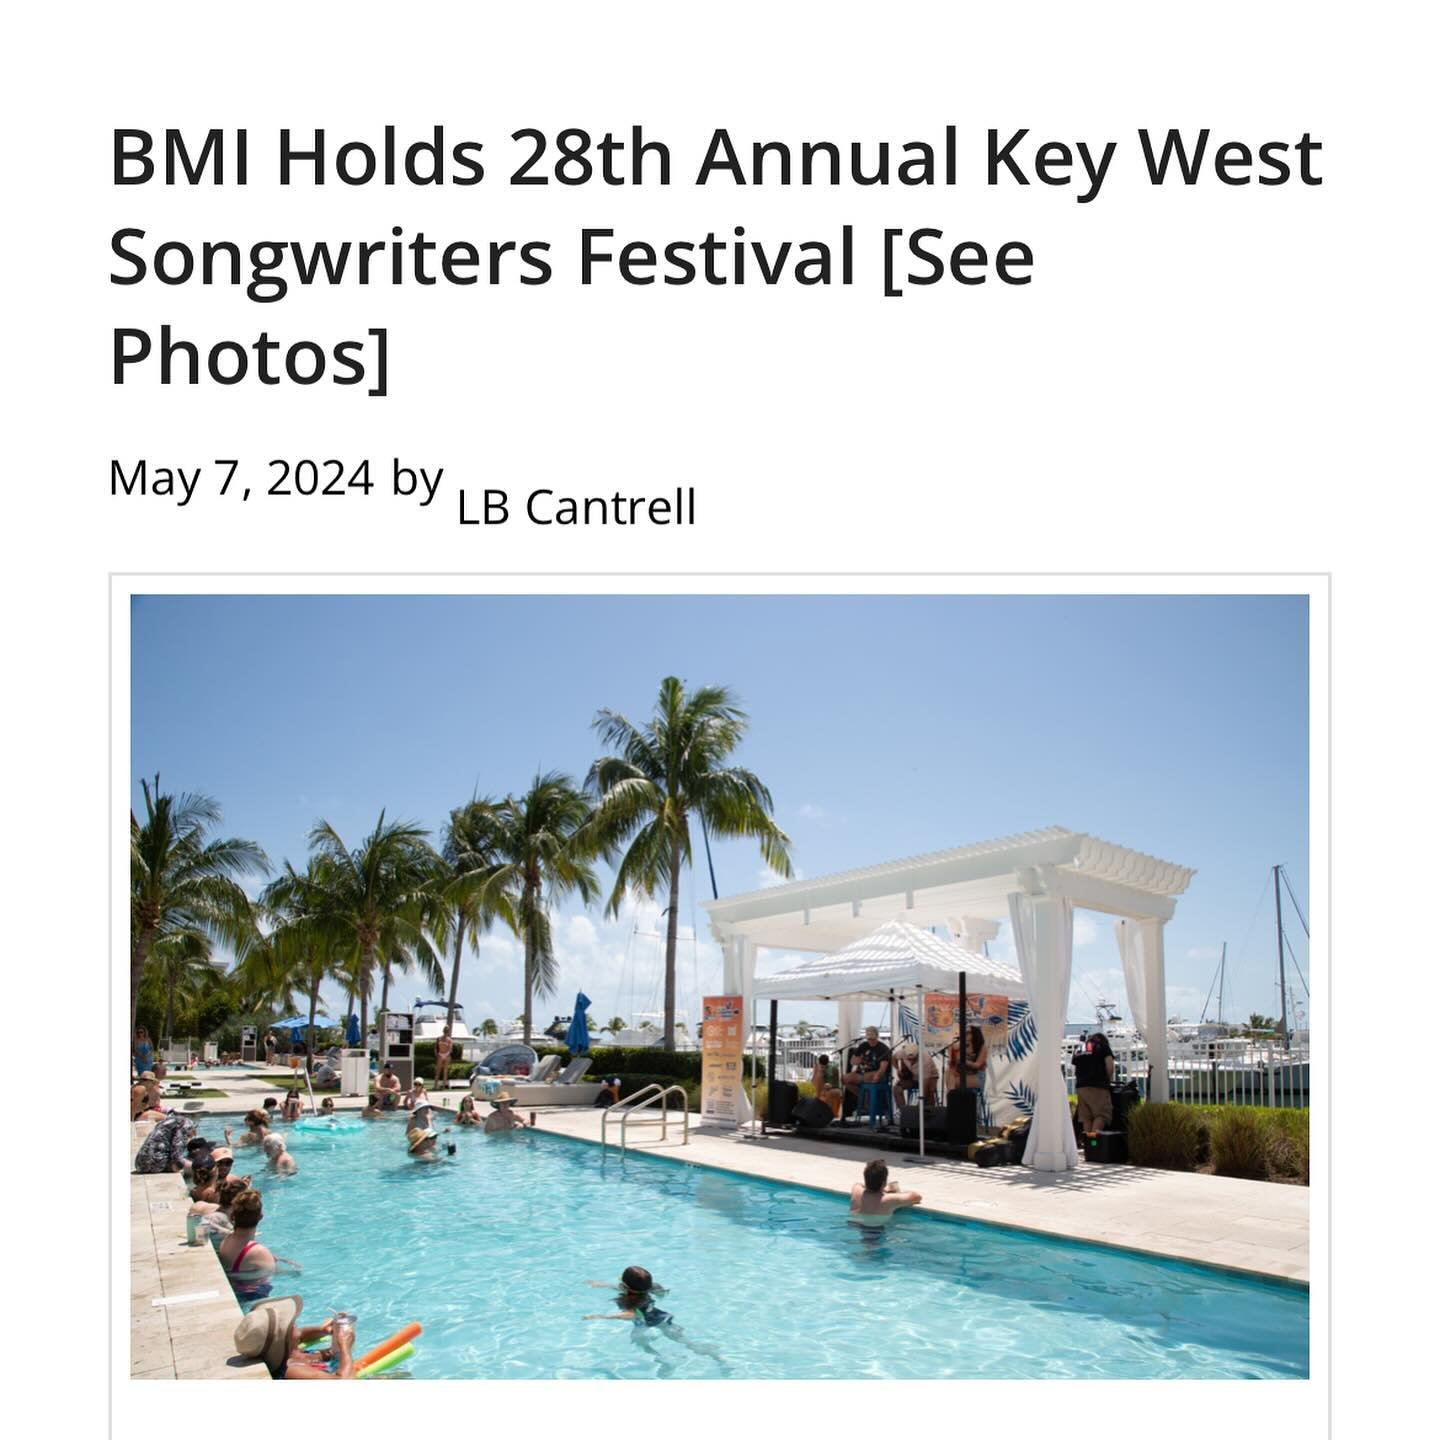 Thanks @musicrowmagazine for the mention and a HUGE thanks to @bmi @keywestsongwritersfestival for letting us be a part of such a great week for country music 🏝️
&bull;
&bull;
&bull;
&bull;
&bull;
&bull;
#countrymusic #bmi #keywest #originalmusic #e